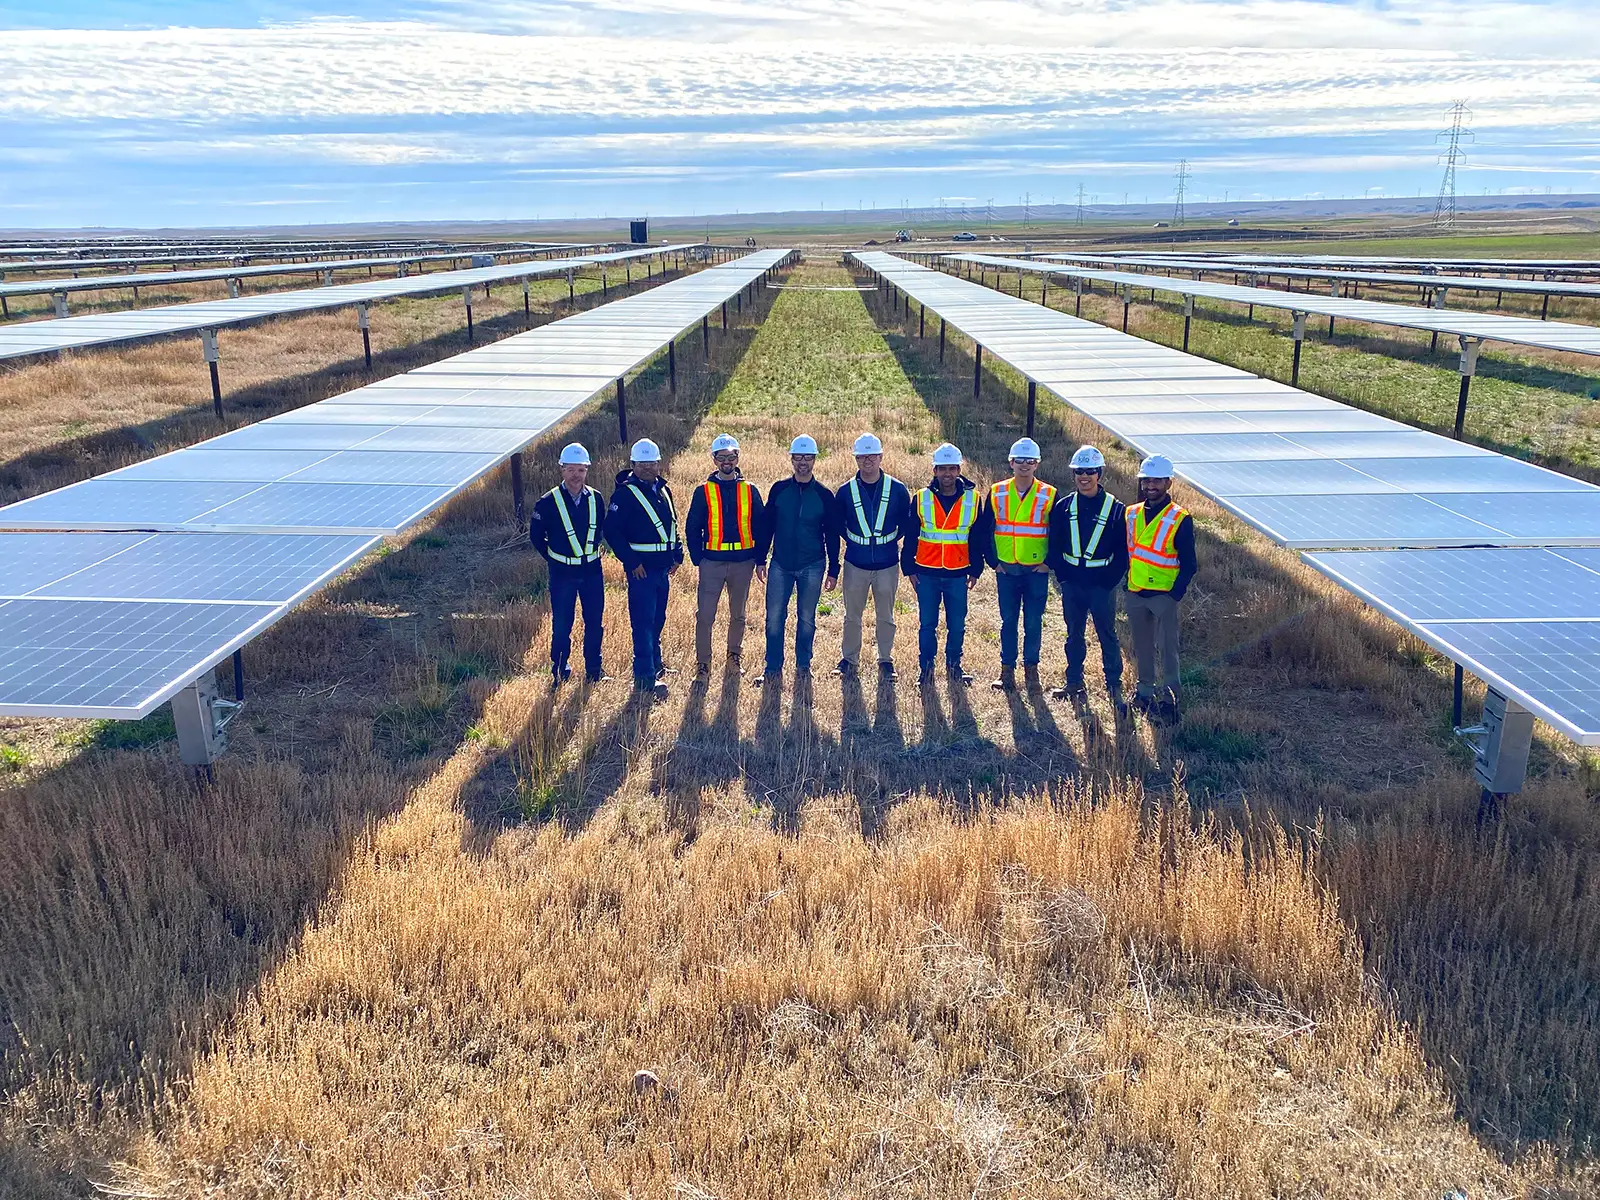 Kilo Power Calgary men with safety gear on field with solar panels